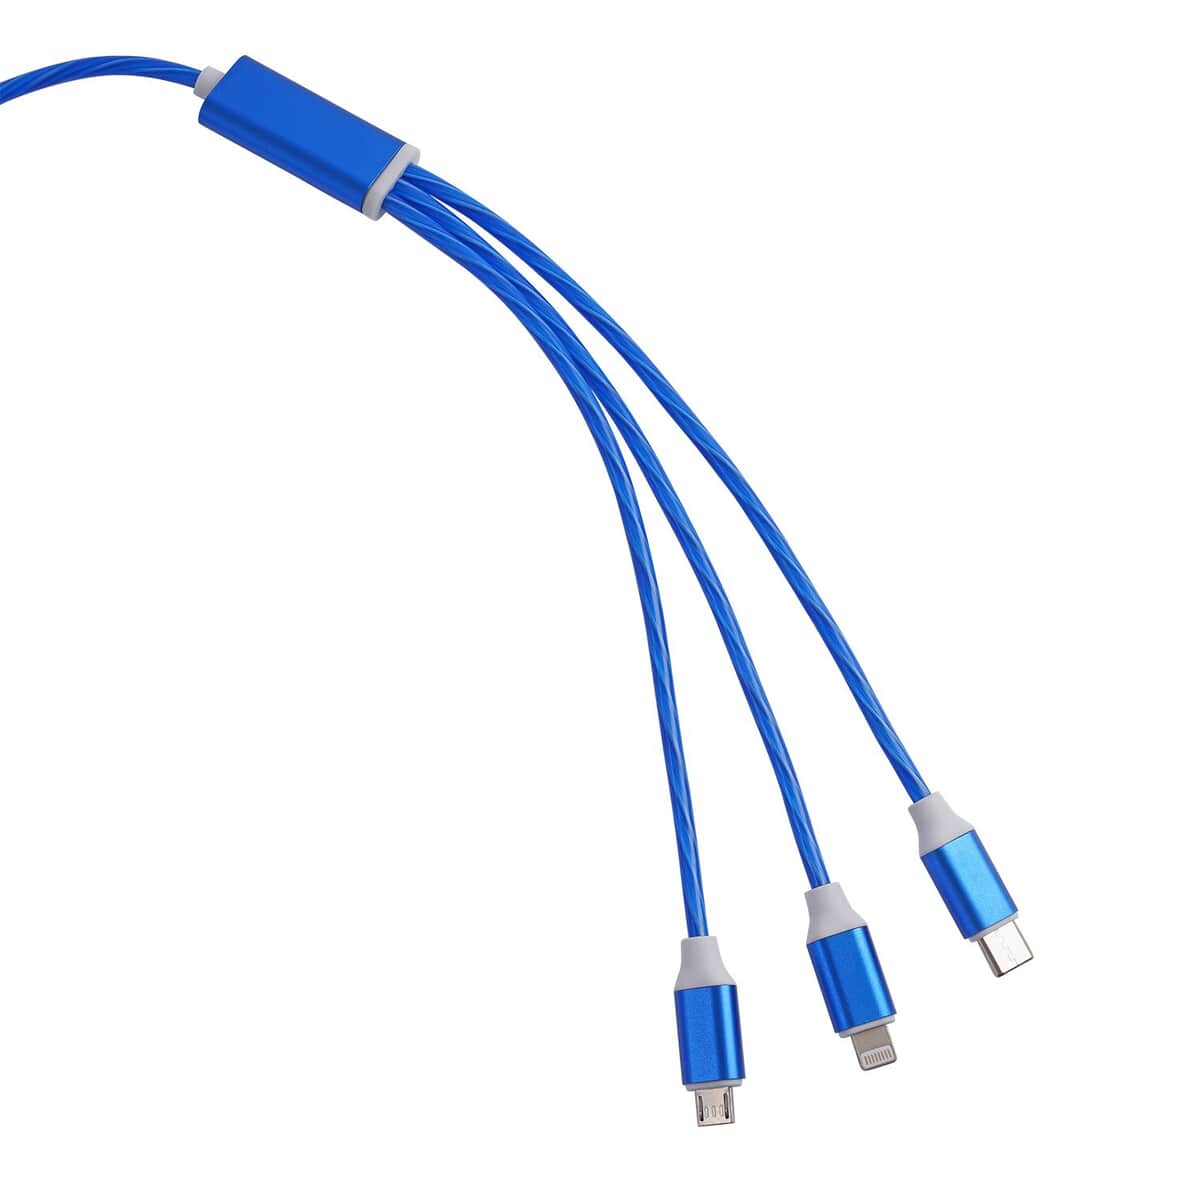 2pcs Set 3 in 1 Light Moving Charging Cable - Blue (47.24") image number 2